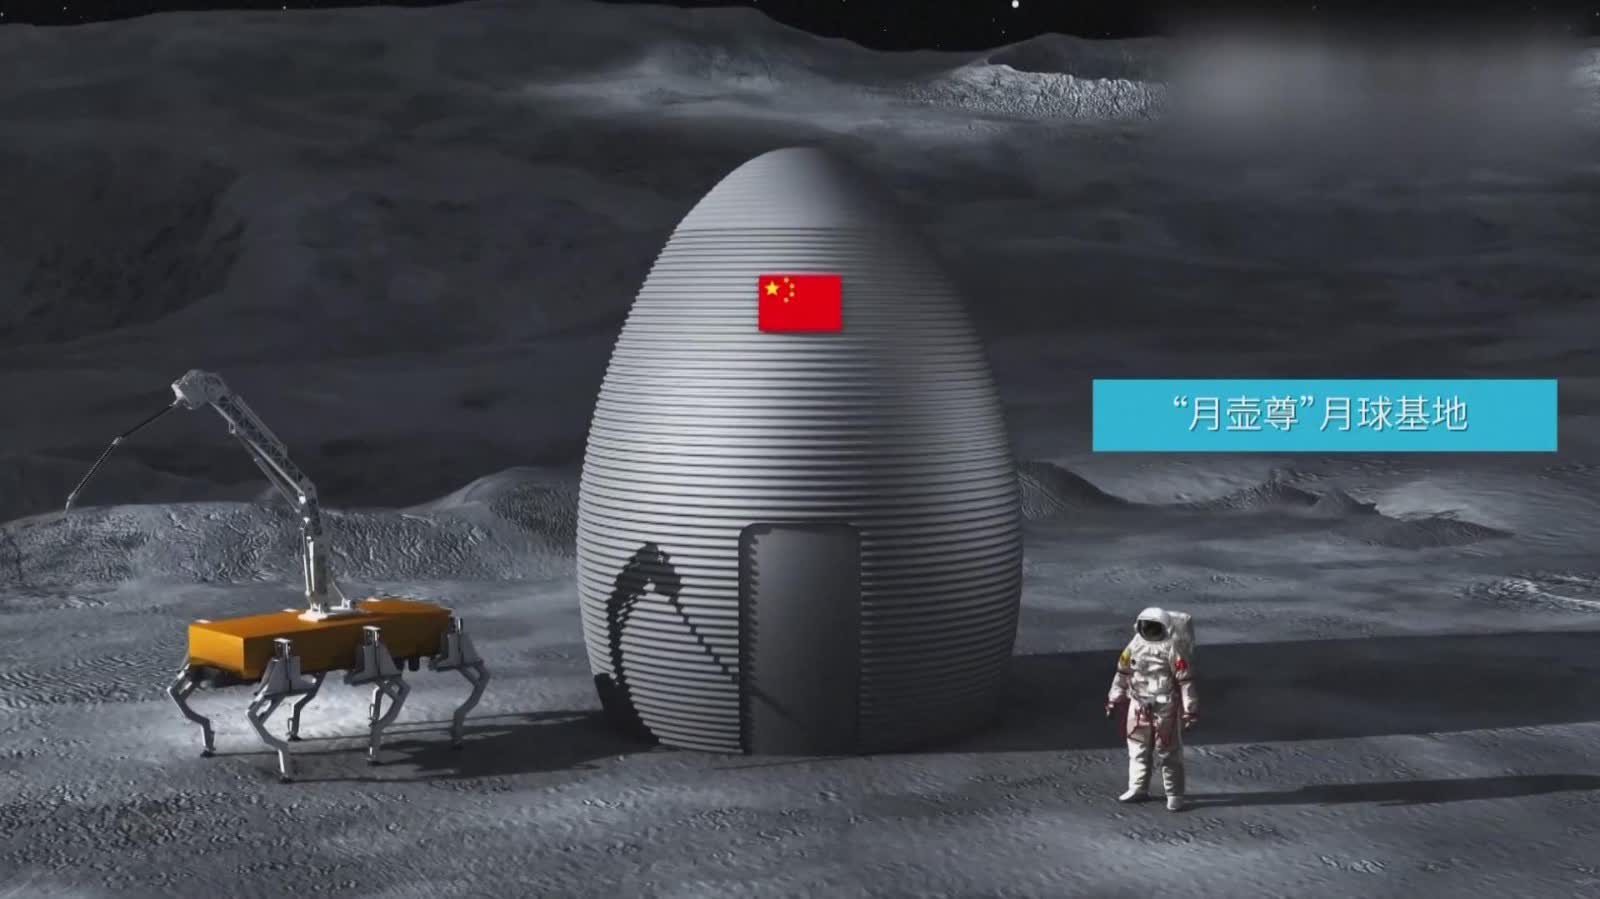 Chinese scientists press ahead with lunar base construction project